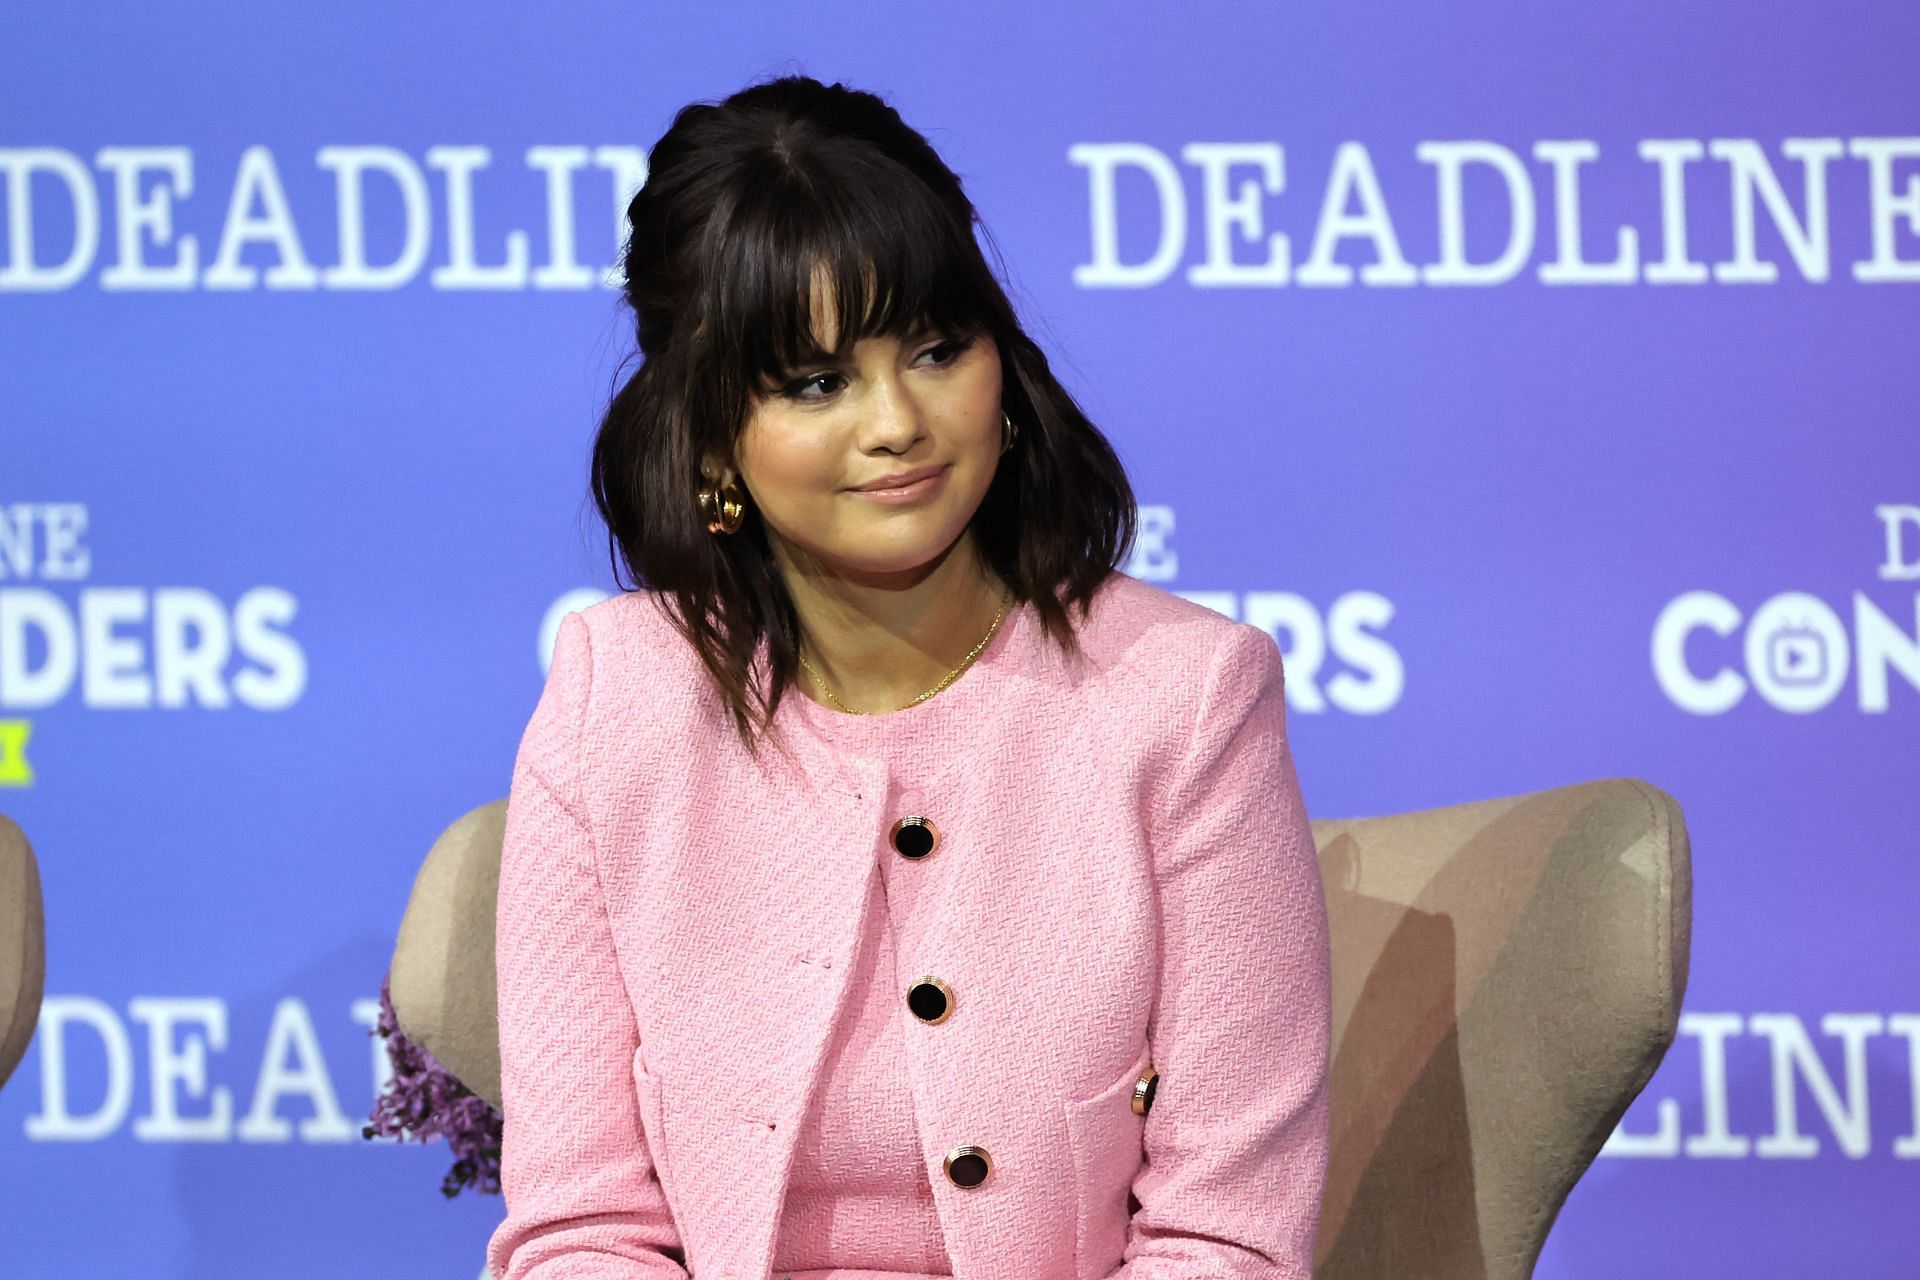 Selena Gomez has battled Lupus for over a decade. (Photo by Kevin Winter/Getty Images for Deadline Hollywood )